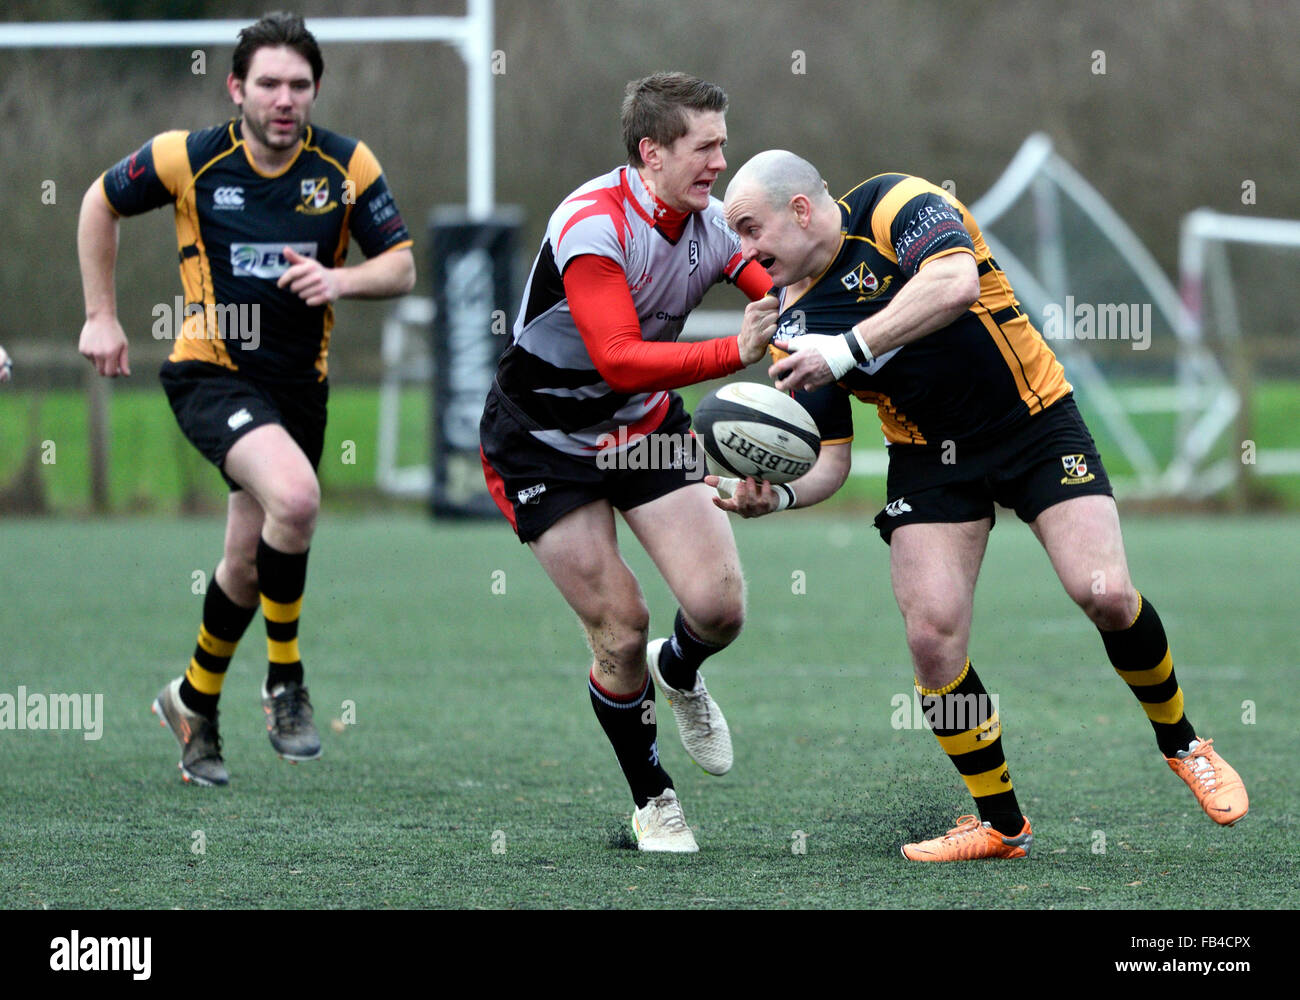 Burnage 9th January 2016  A Burnage player tries to pass the ball in a match in which Burnage Rugby Club were attempting to move from bottom place in the league but were heavily defeated by Ilkley, who were third bottom. Credit:  John Fryer/Alamy Live News Stock Photo